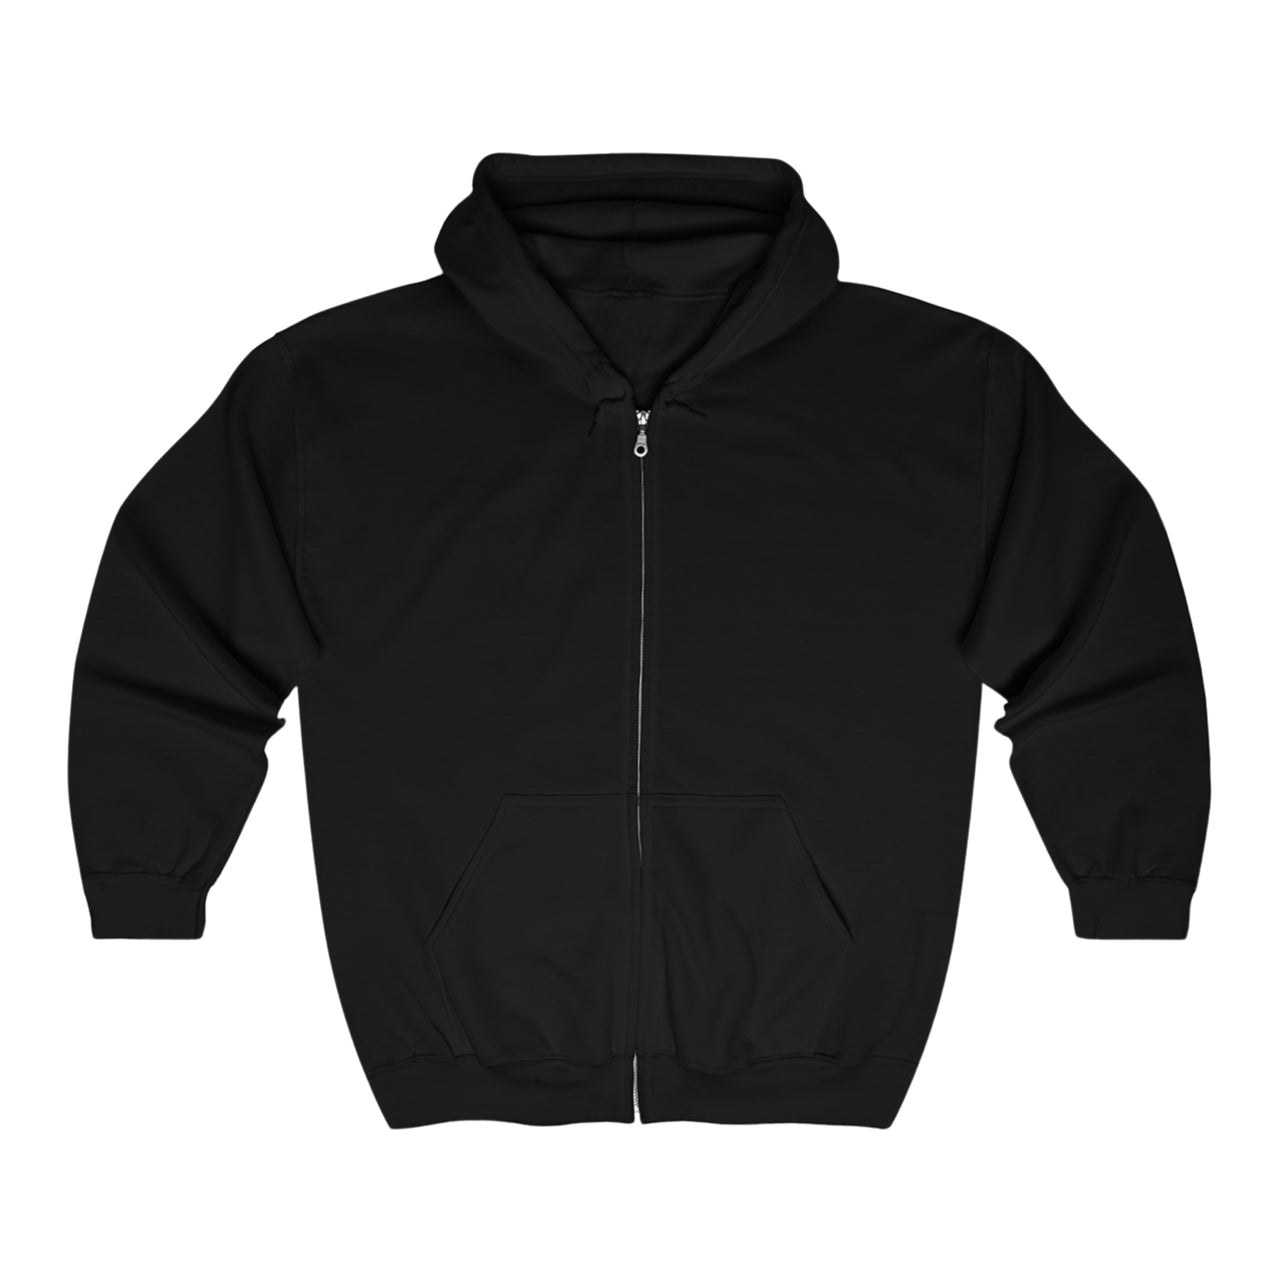 America First Full Zip Hooded Sweatshirt-Black-no graphic on front